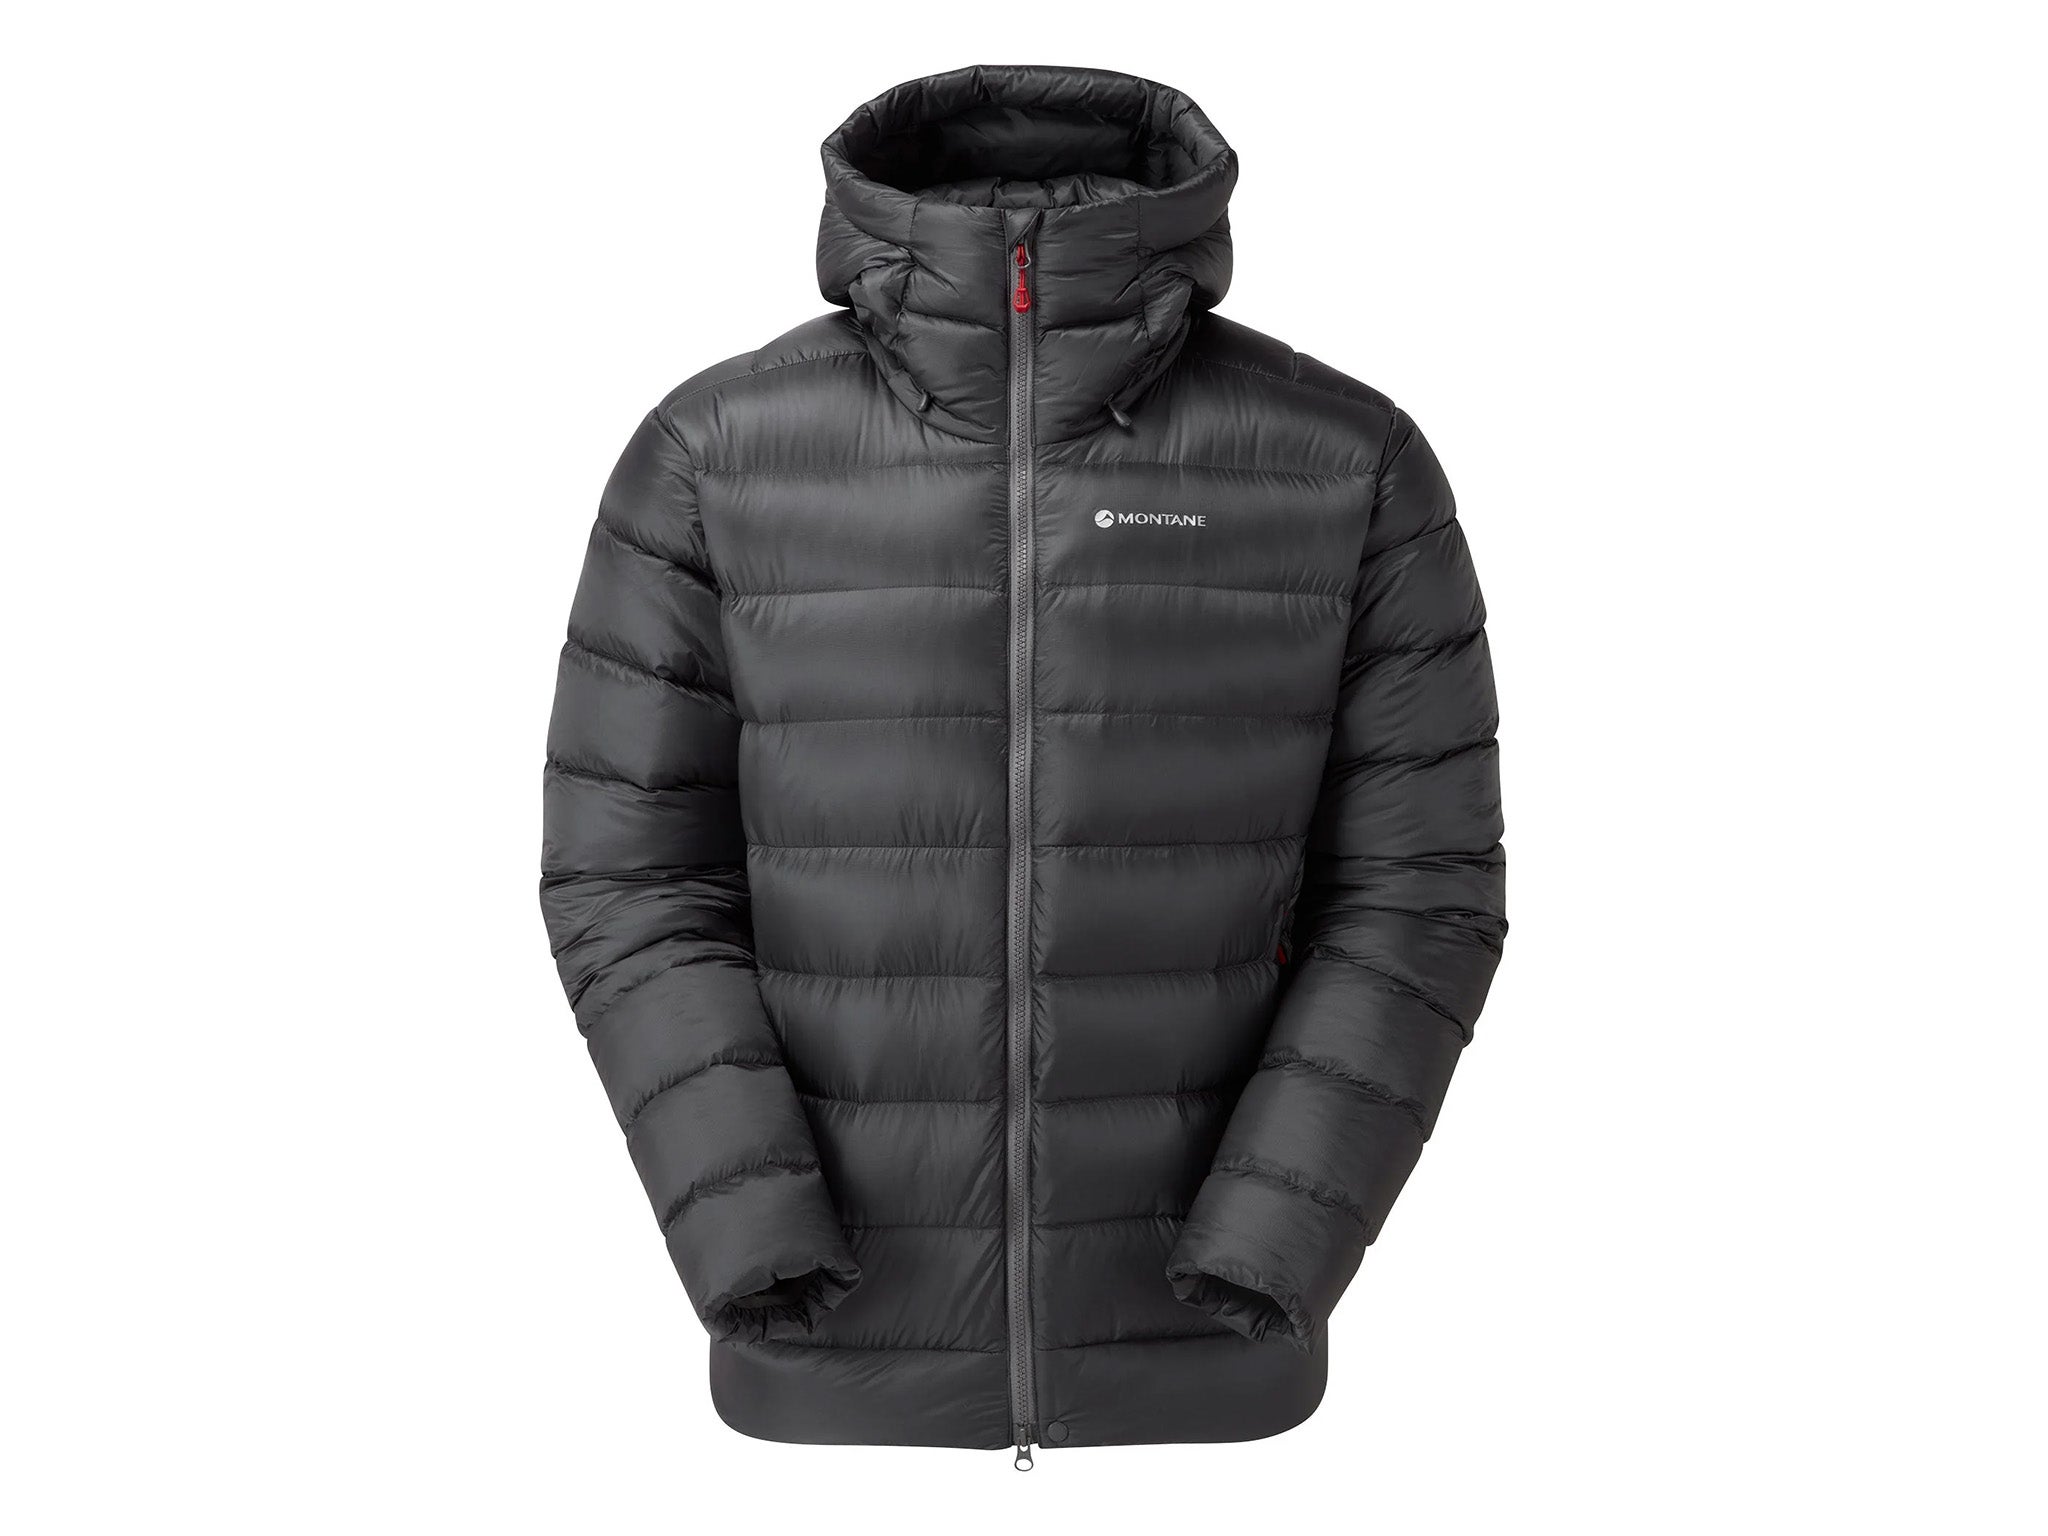 Discount Moncler Milano Mens Down Jackets Wine Red Really - $211.65 Moncler  Jackets For Men by www.monclerlines.com/men-moncler-j… | Jacken herren,  Jacken, Moncler